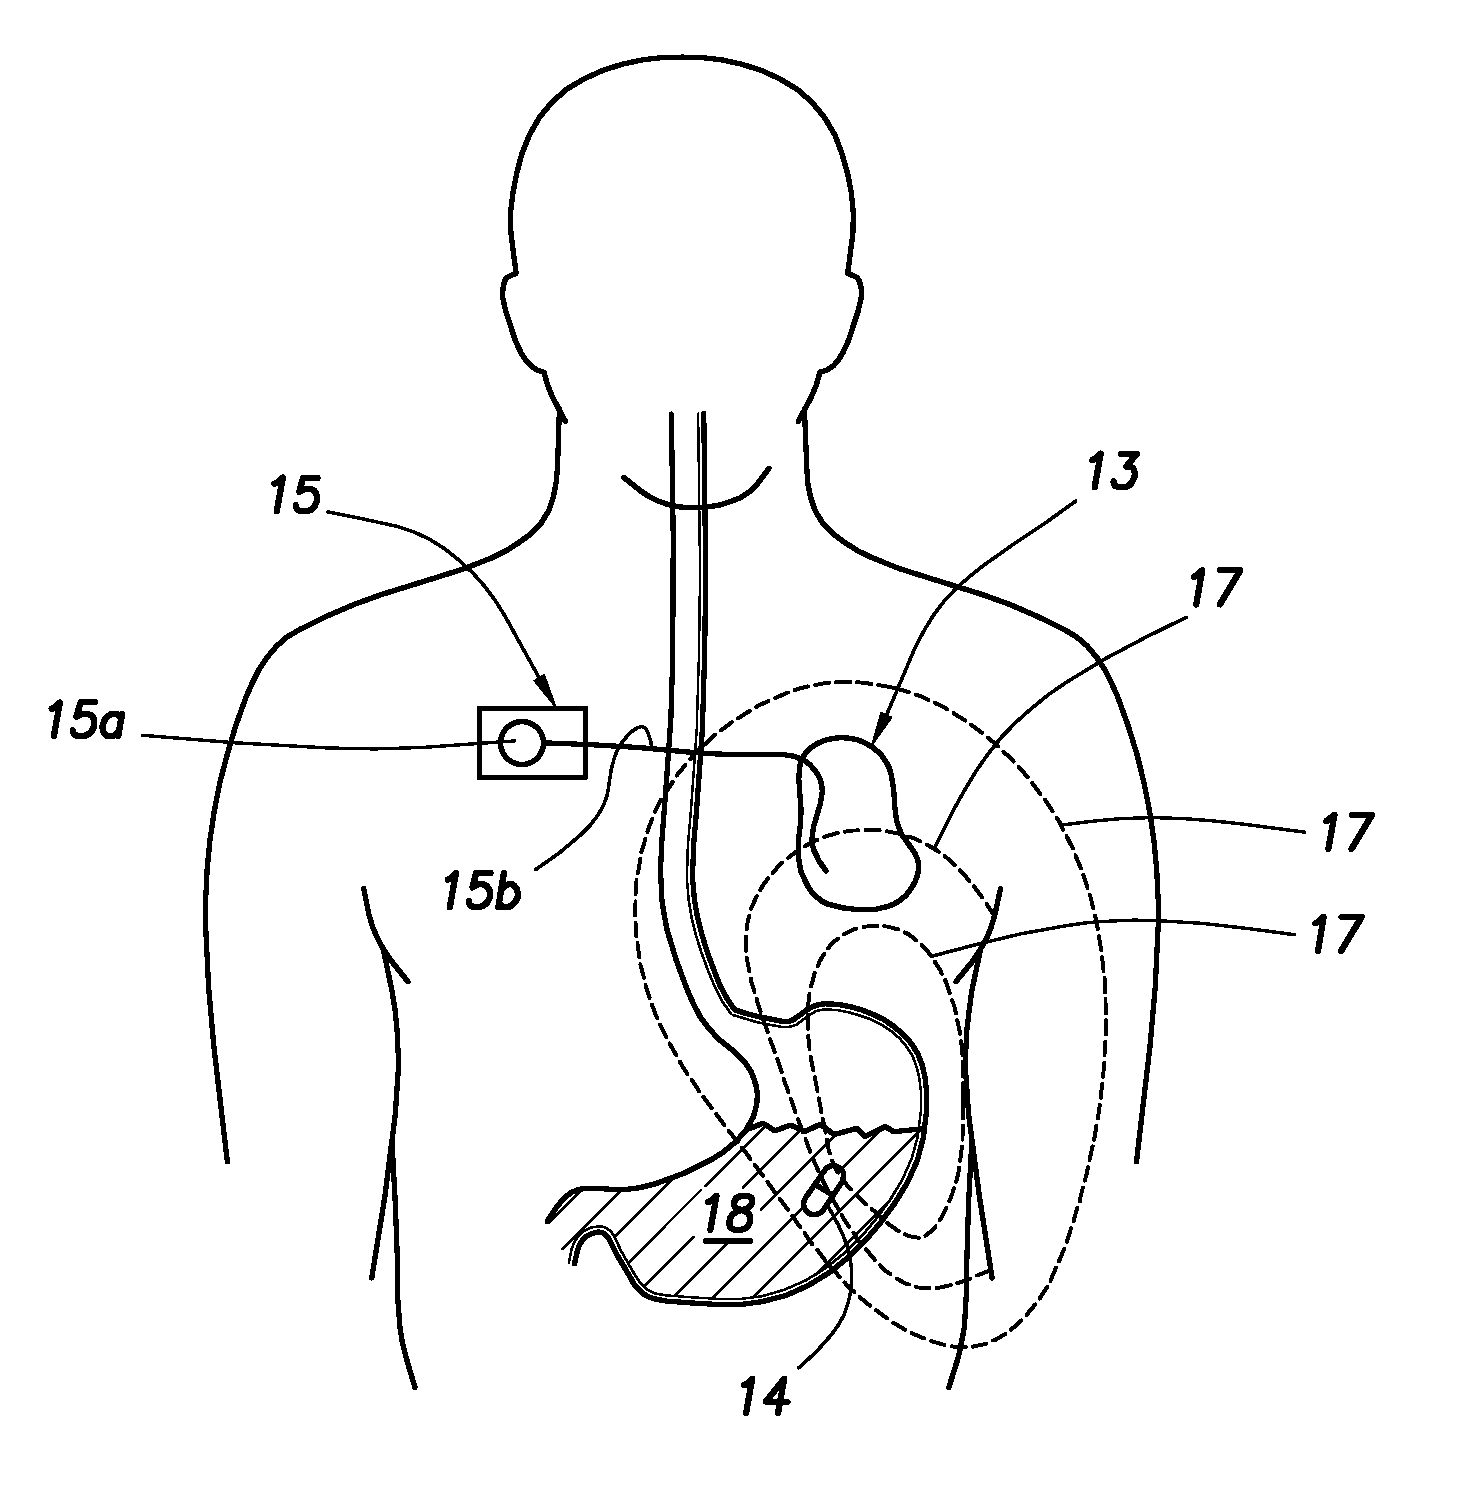 Communication System Using an Implantable Device